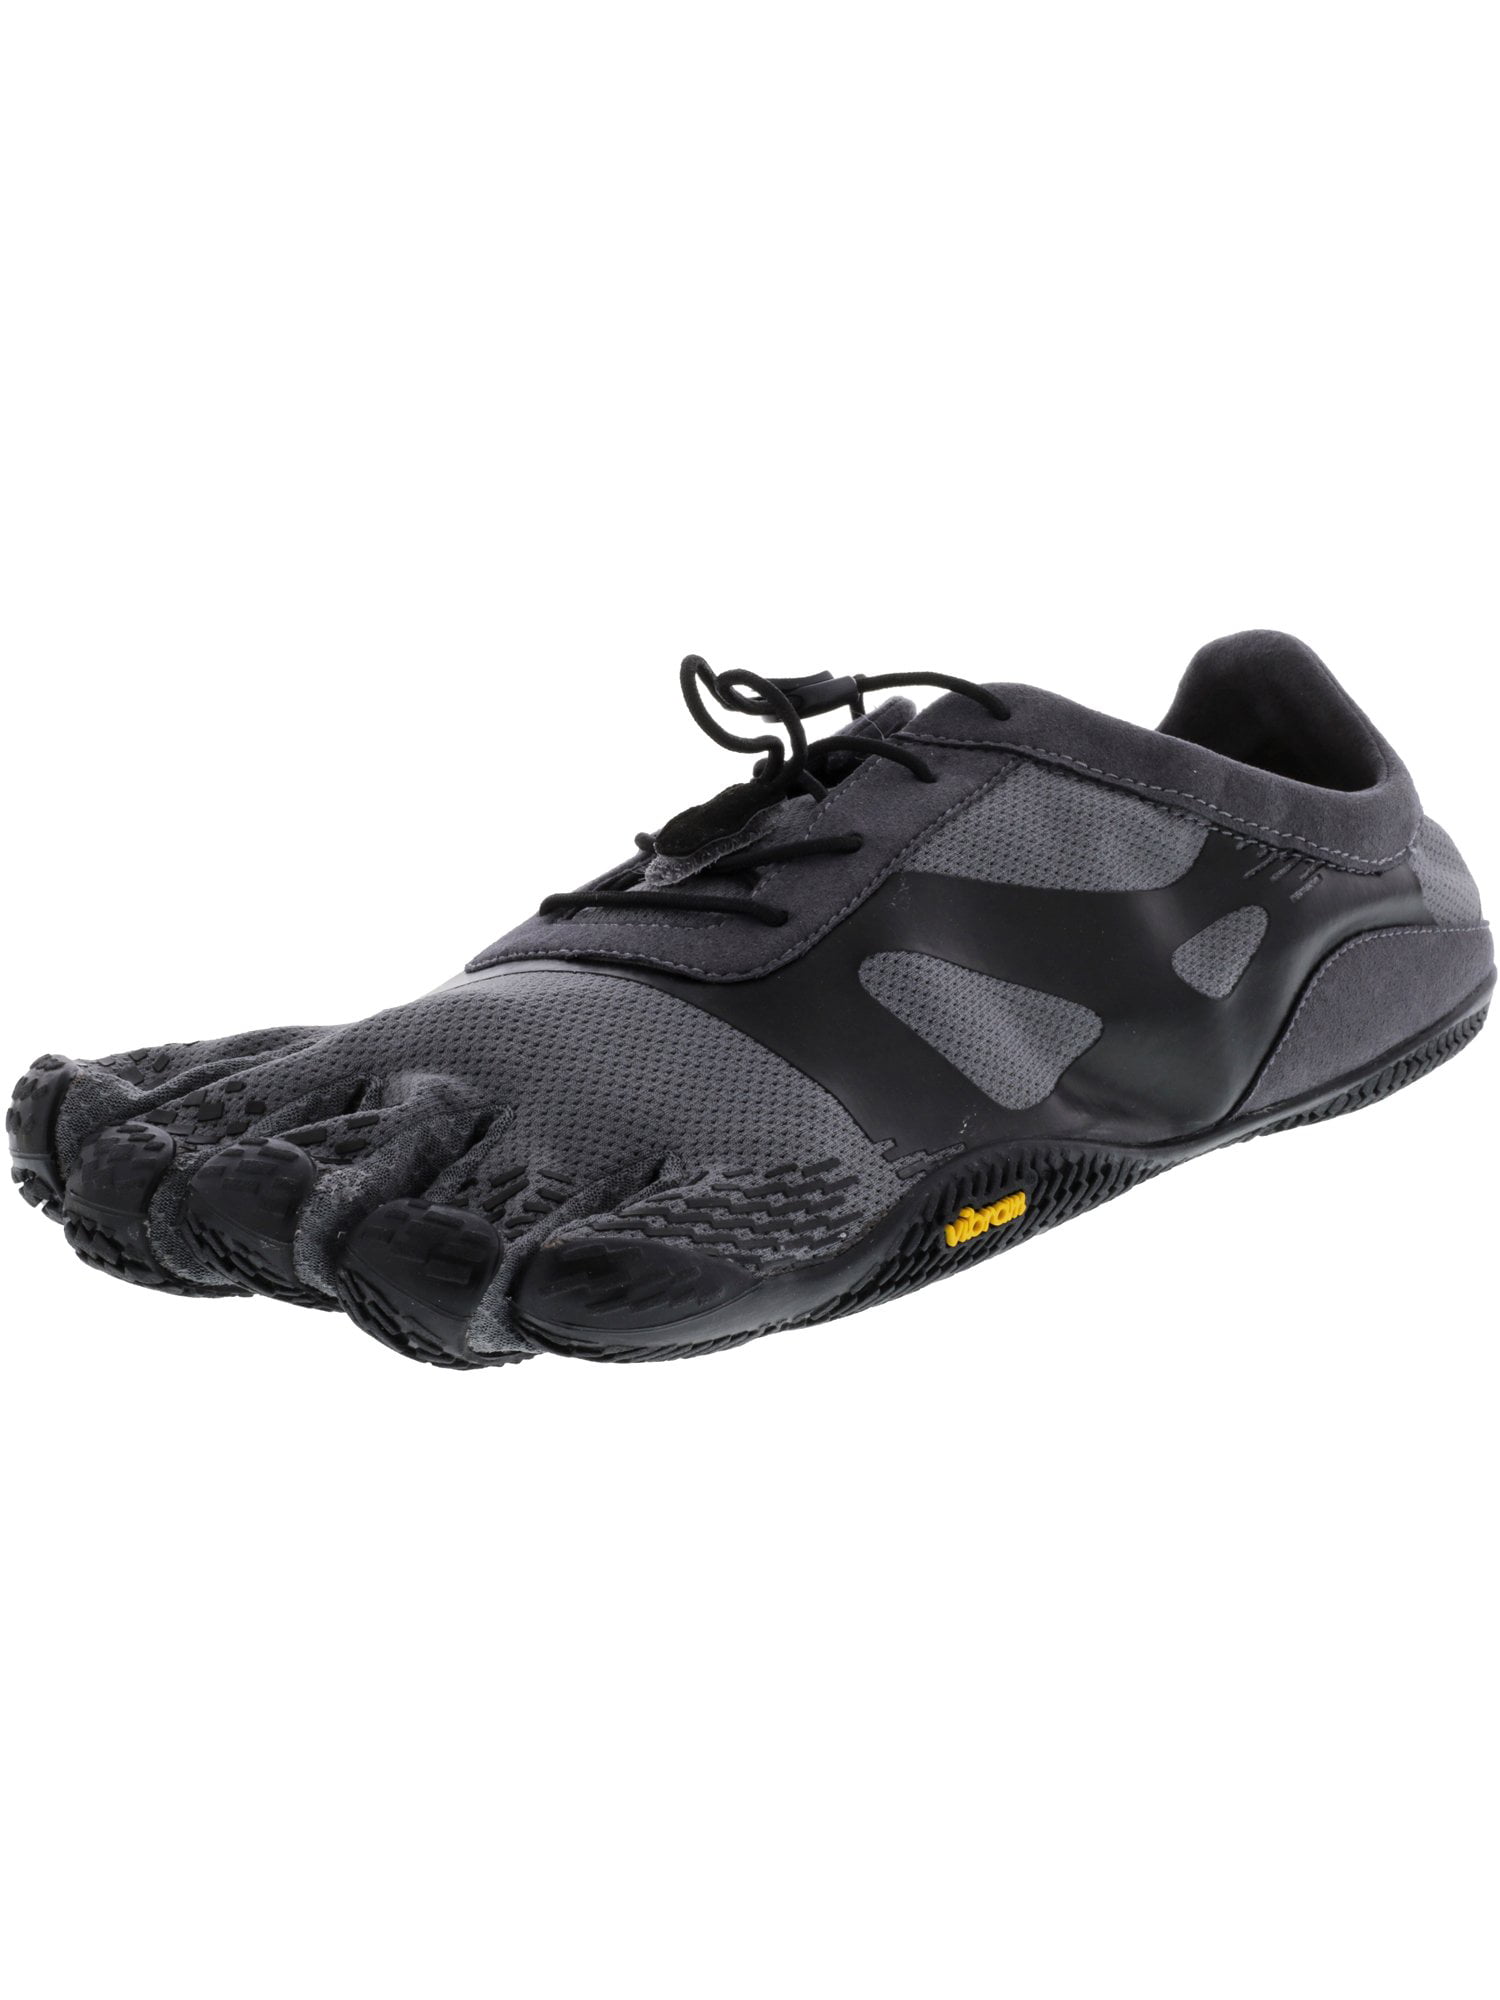 Vibram Mens FiveFingers Kso Evo Running Shoes Trainers Sneakers Grey Sports 